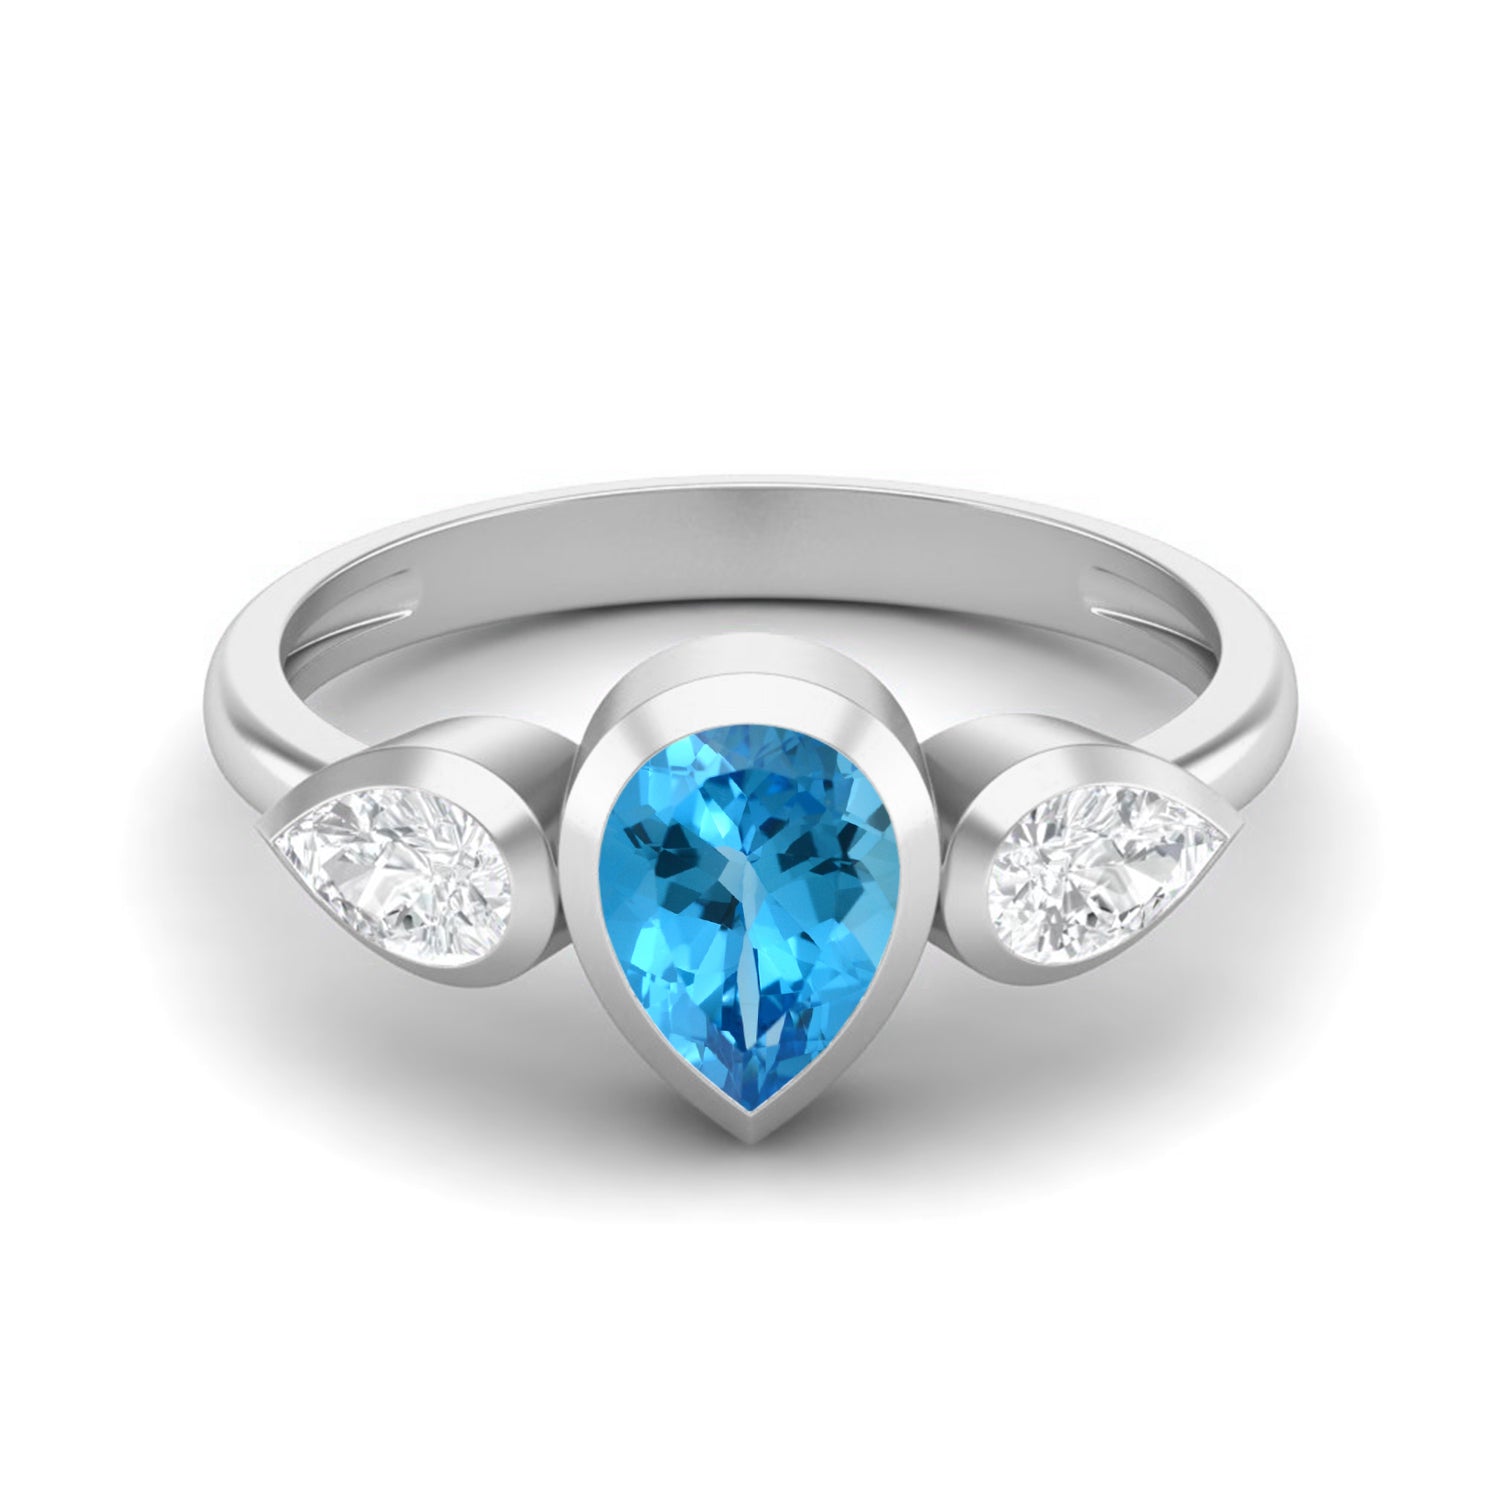 London Blue And Swiss Blue Topaz Ring Sterling Silver By Vianne Jewellery |  notonthehighstreet.com